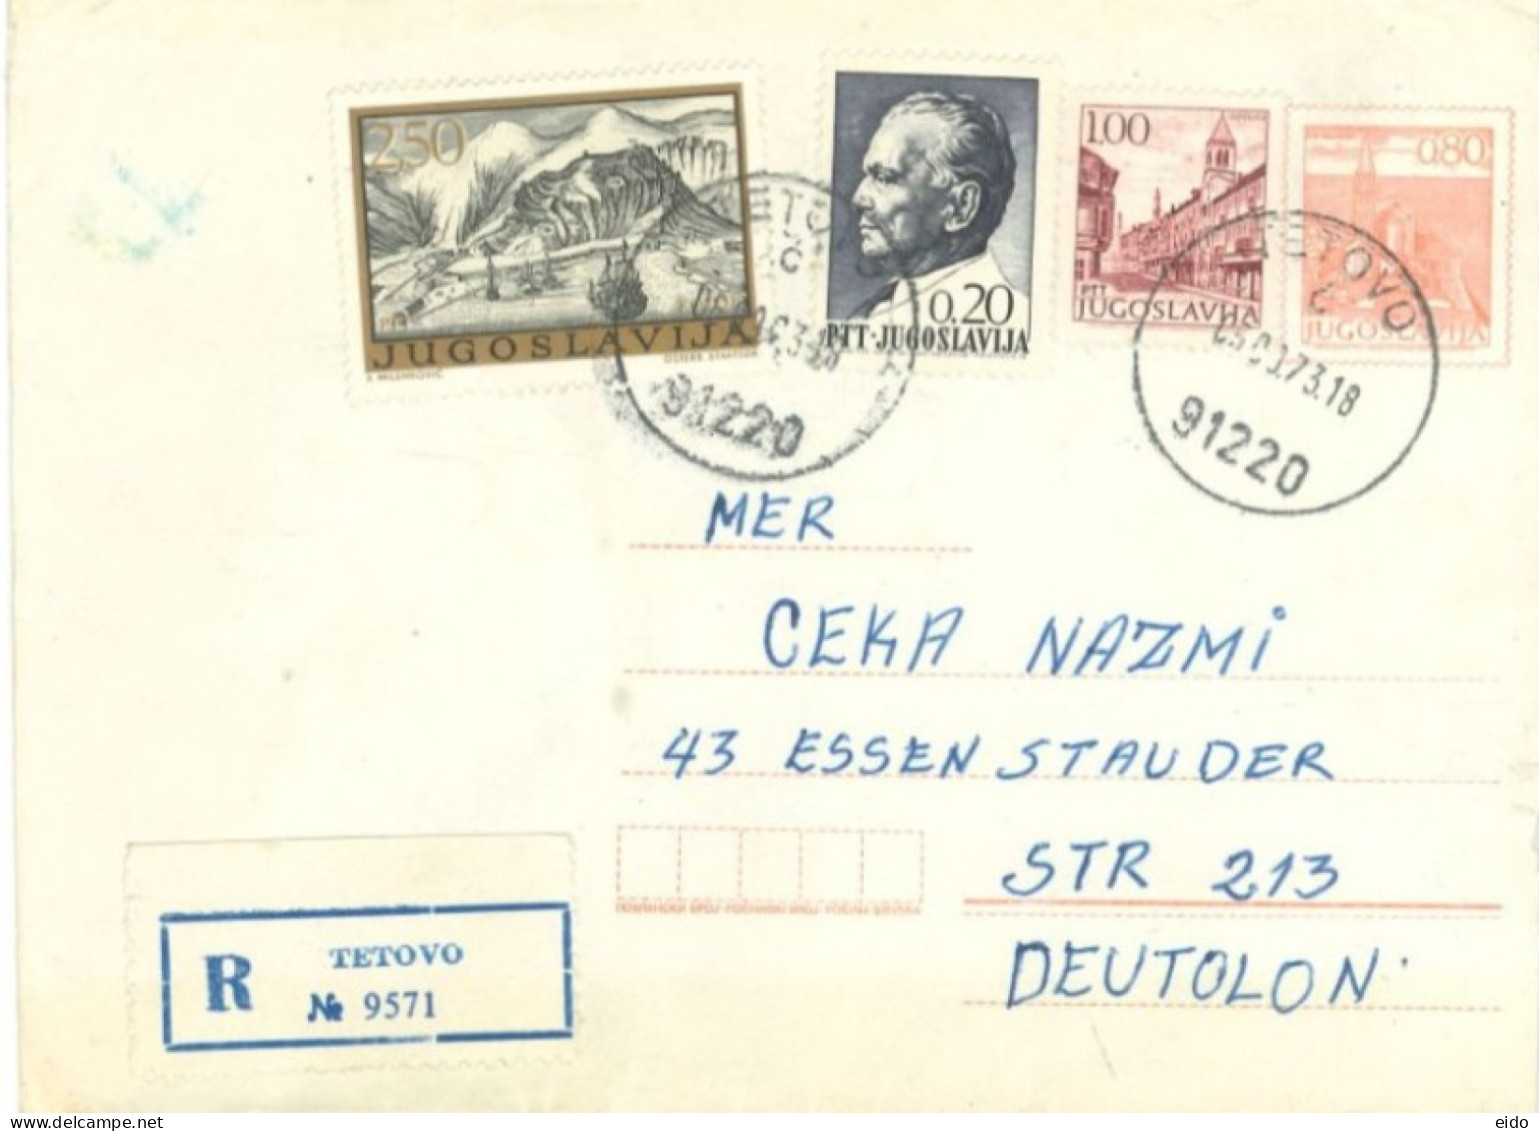 YUGOSLAVIA  - 1973, REGISTERED STAMPS COVER TO GERMANY. - Covers & Documents